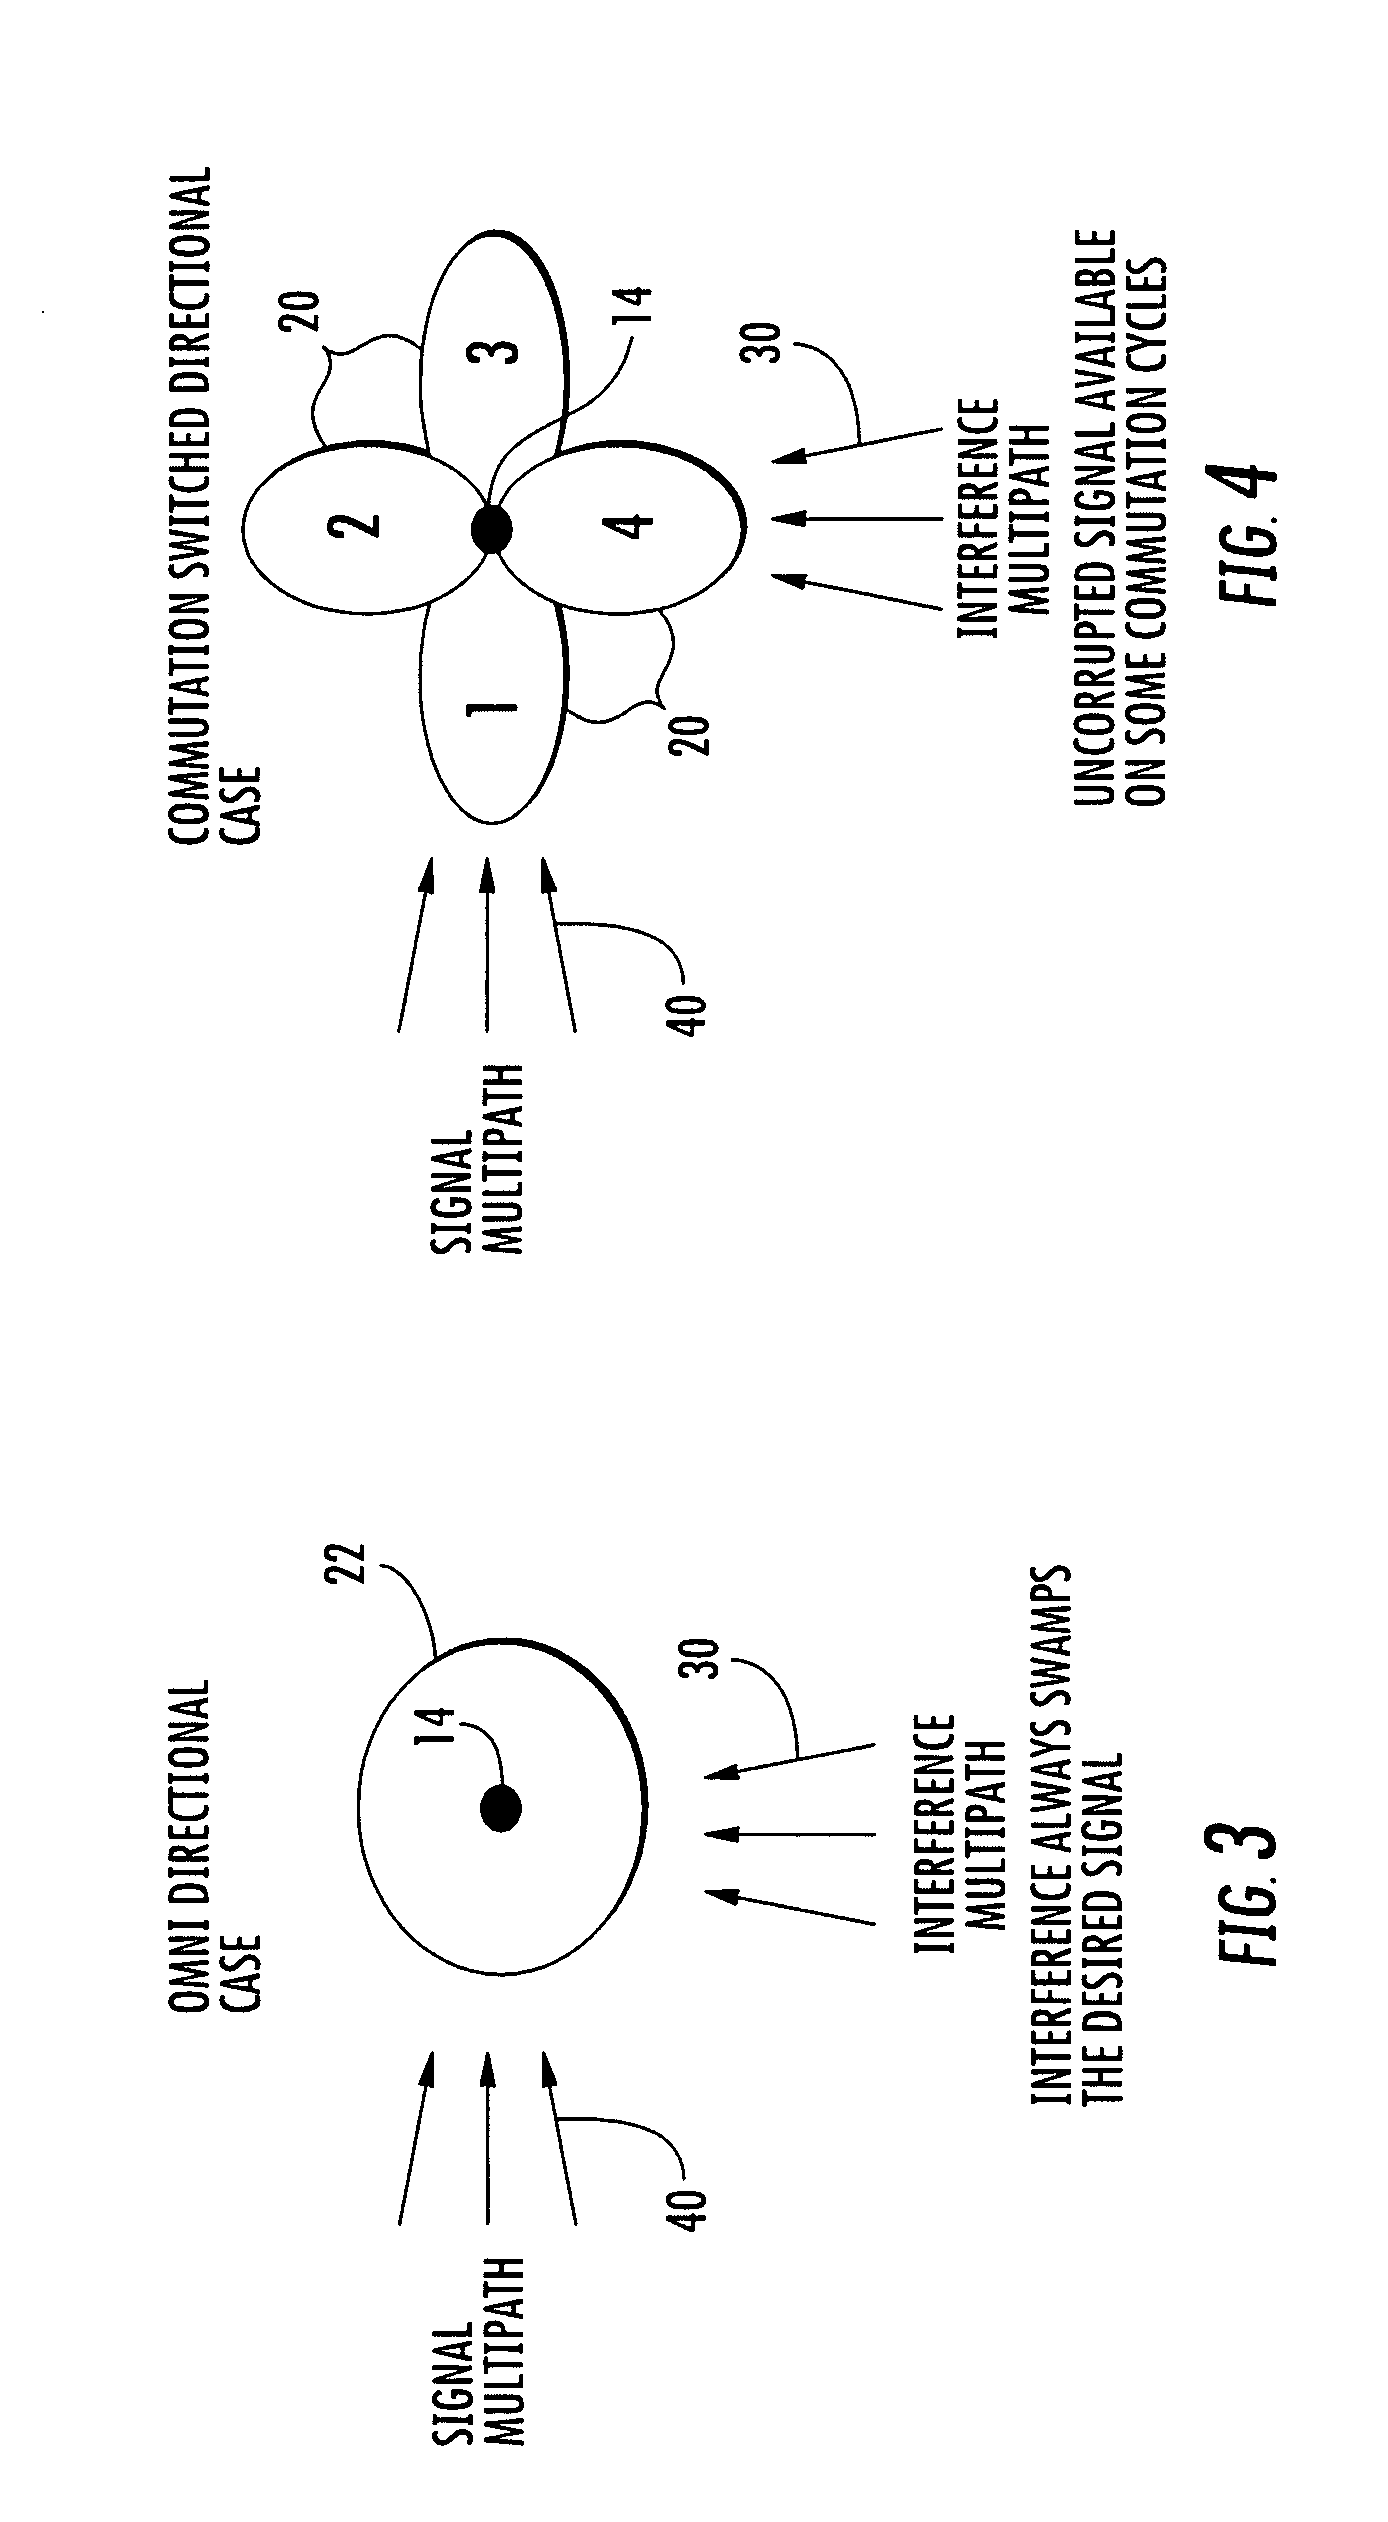 Methods for improving wireless communications when interference or signal loss is directional in nature